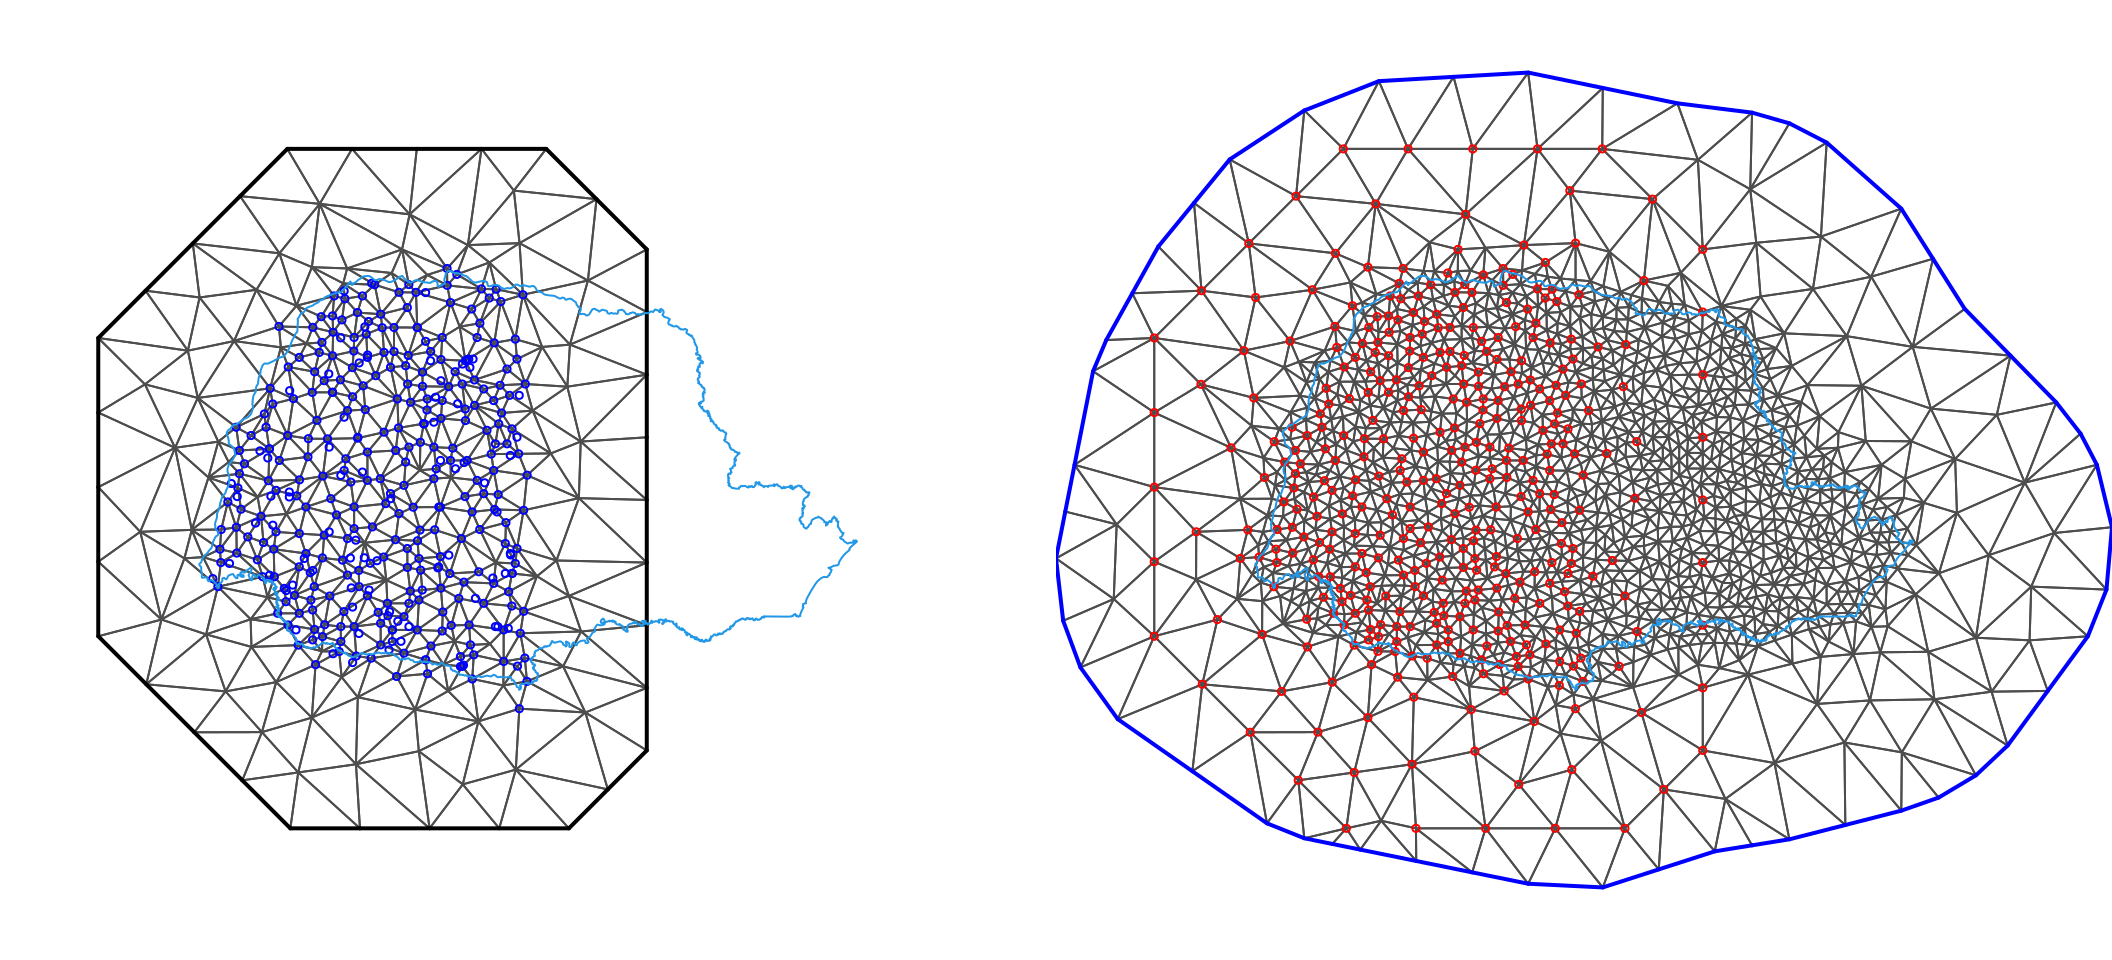 The first mesh, together with the data locations in blue (left). Mesh mesh2, which will be used for predictions, and the points of the first mesh represented as red points (right). The inner blue polygon shows the Paraná state border.